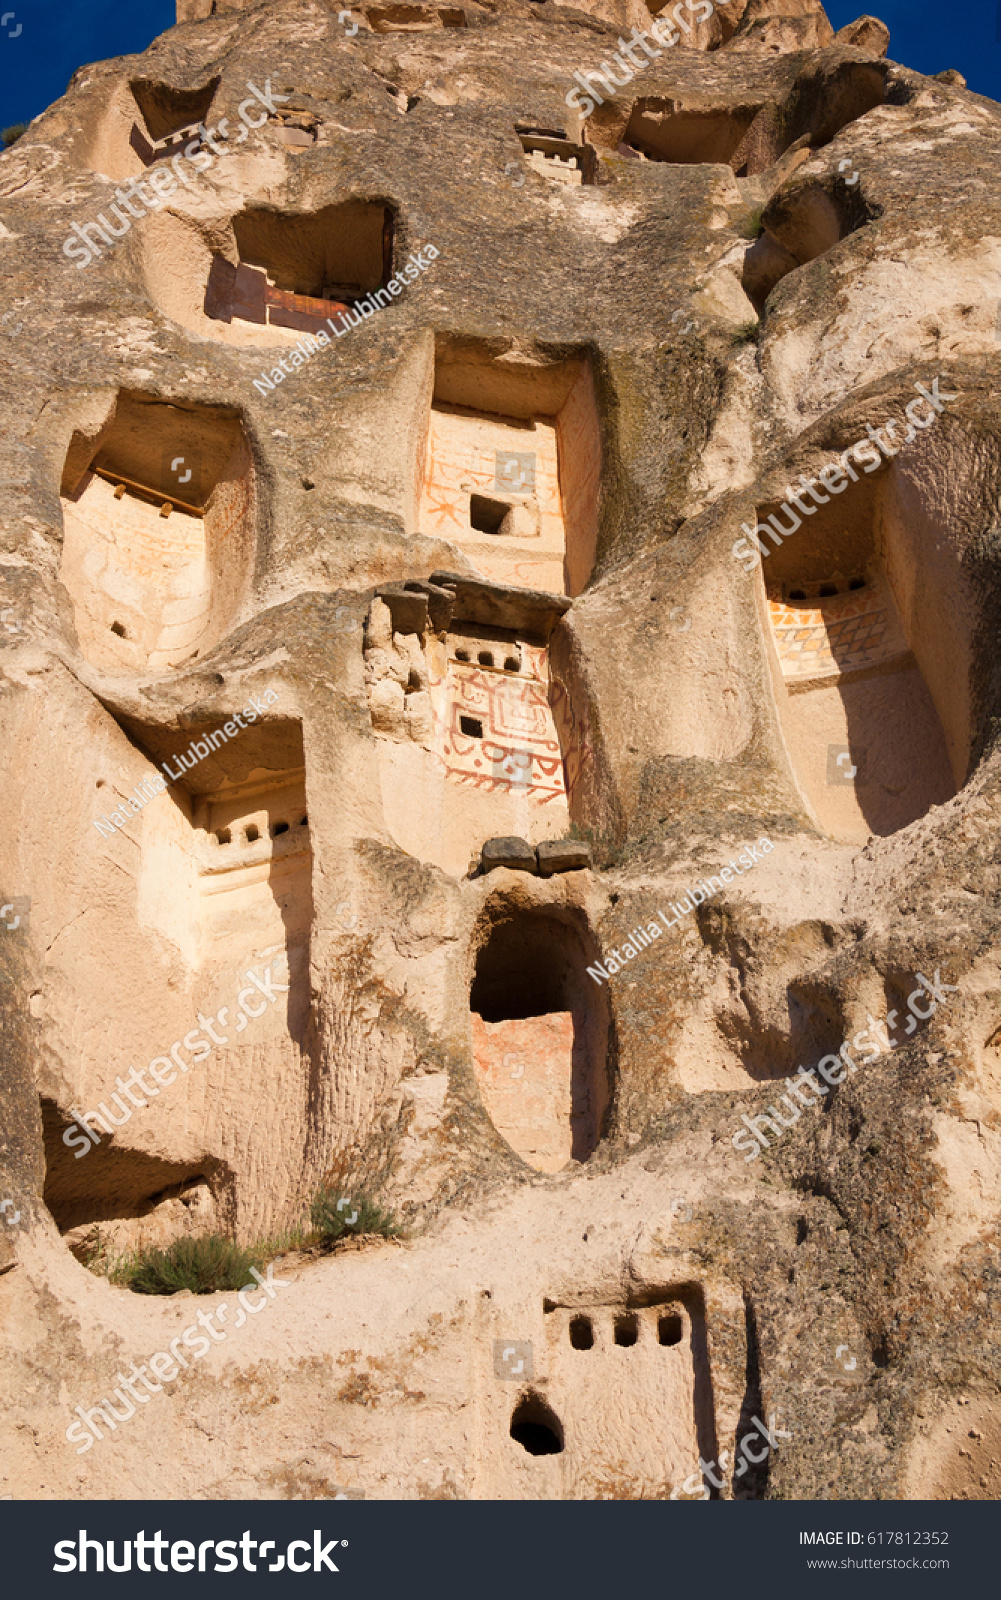 Close-up of a windows in Uchisar Castle, cave houses in Cappadocia, central Turkey #617812352